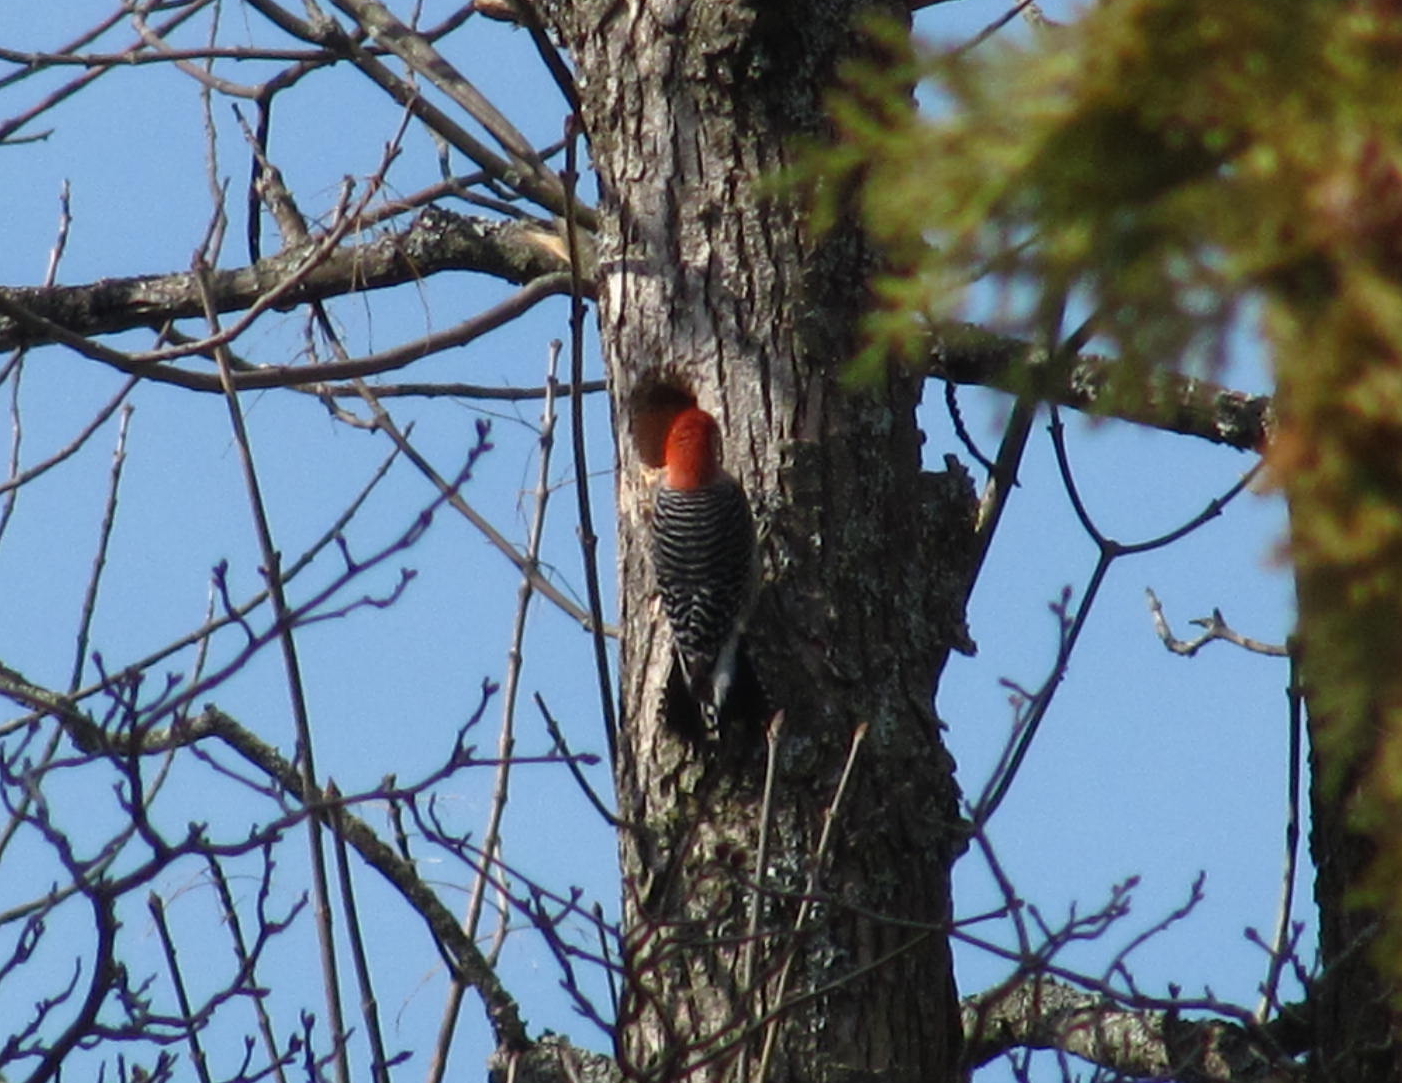 ve observed red bellied woodpeckers nesting in alpena since 2006 ...